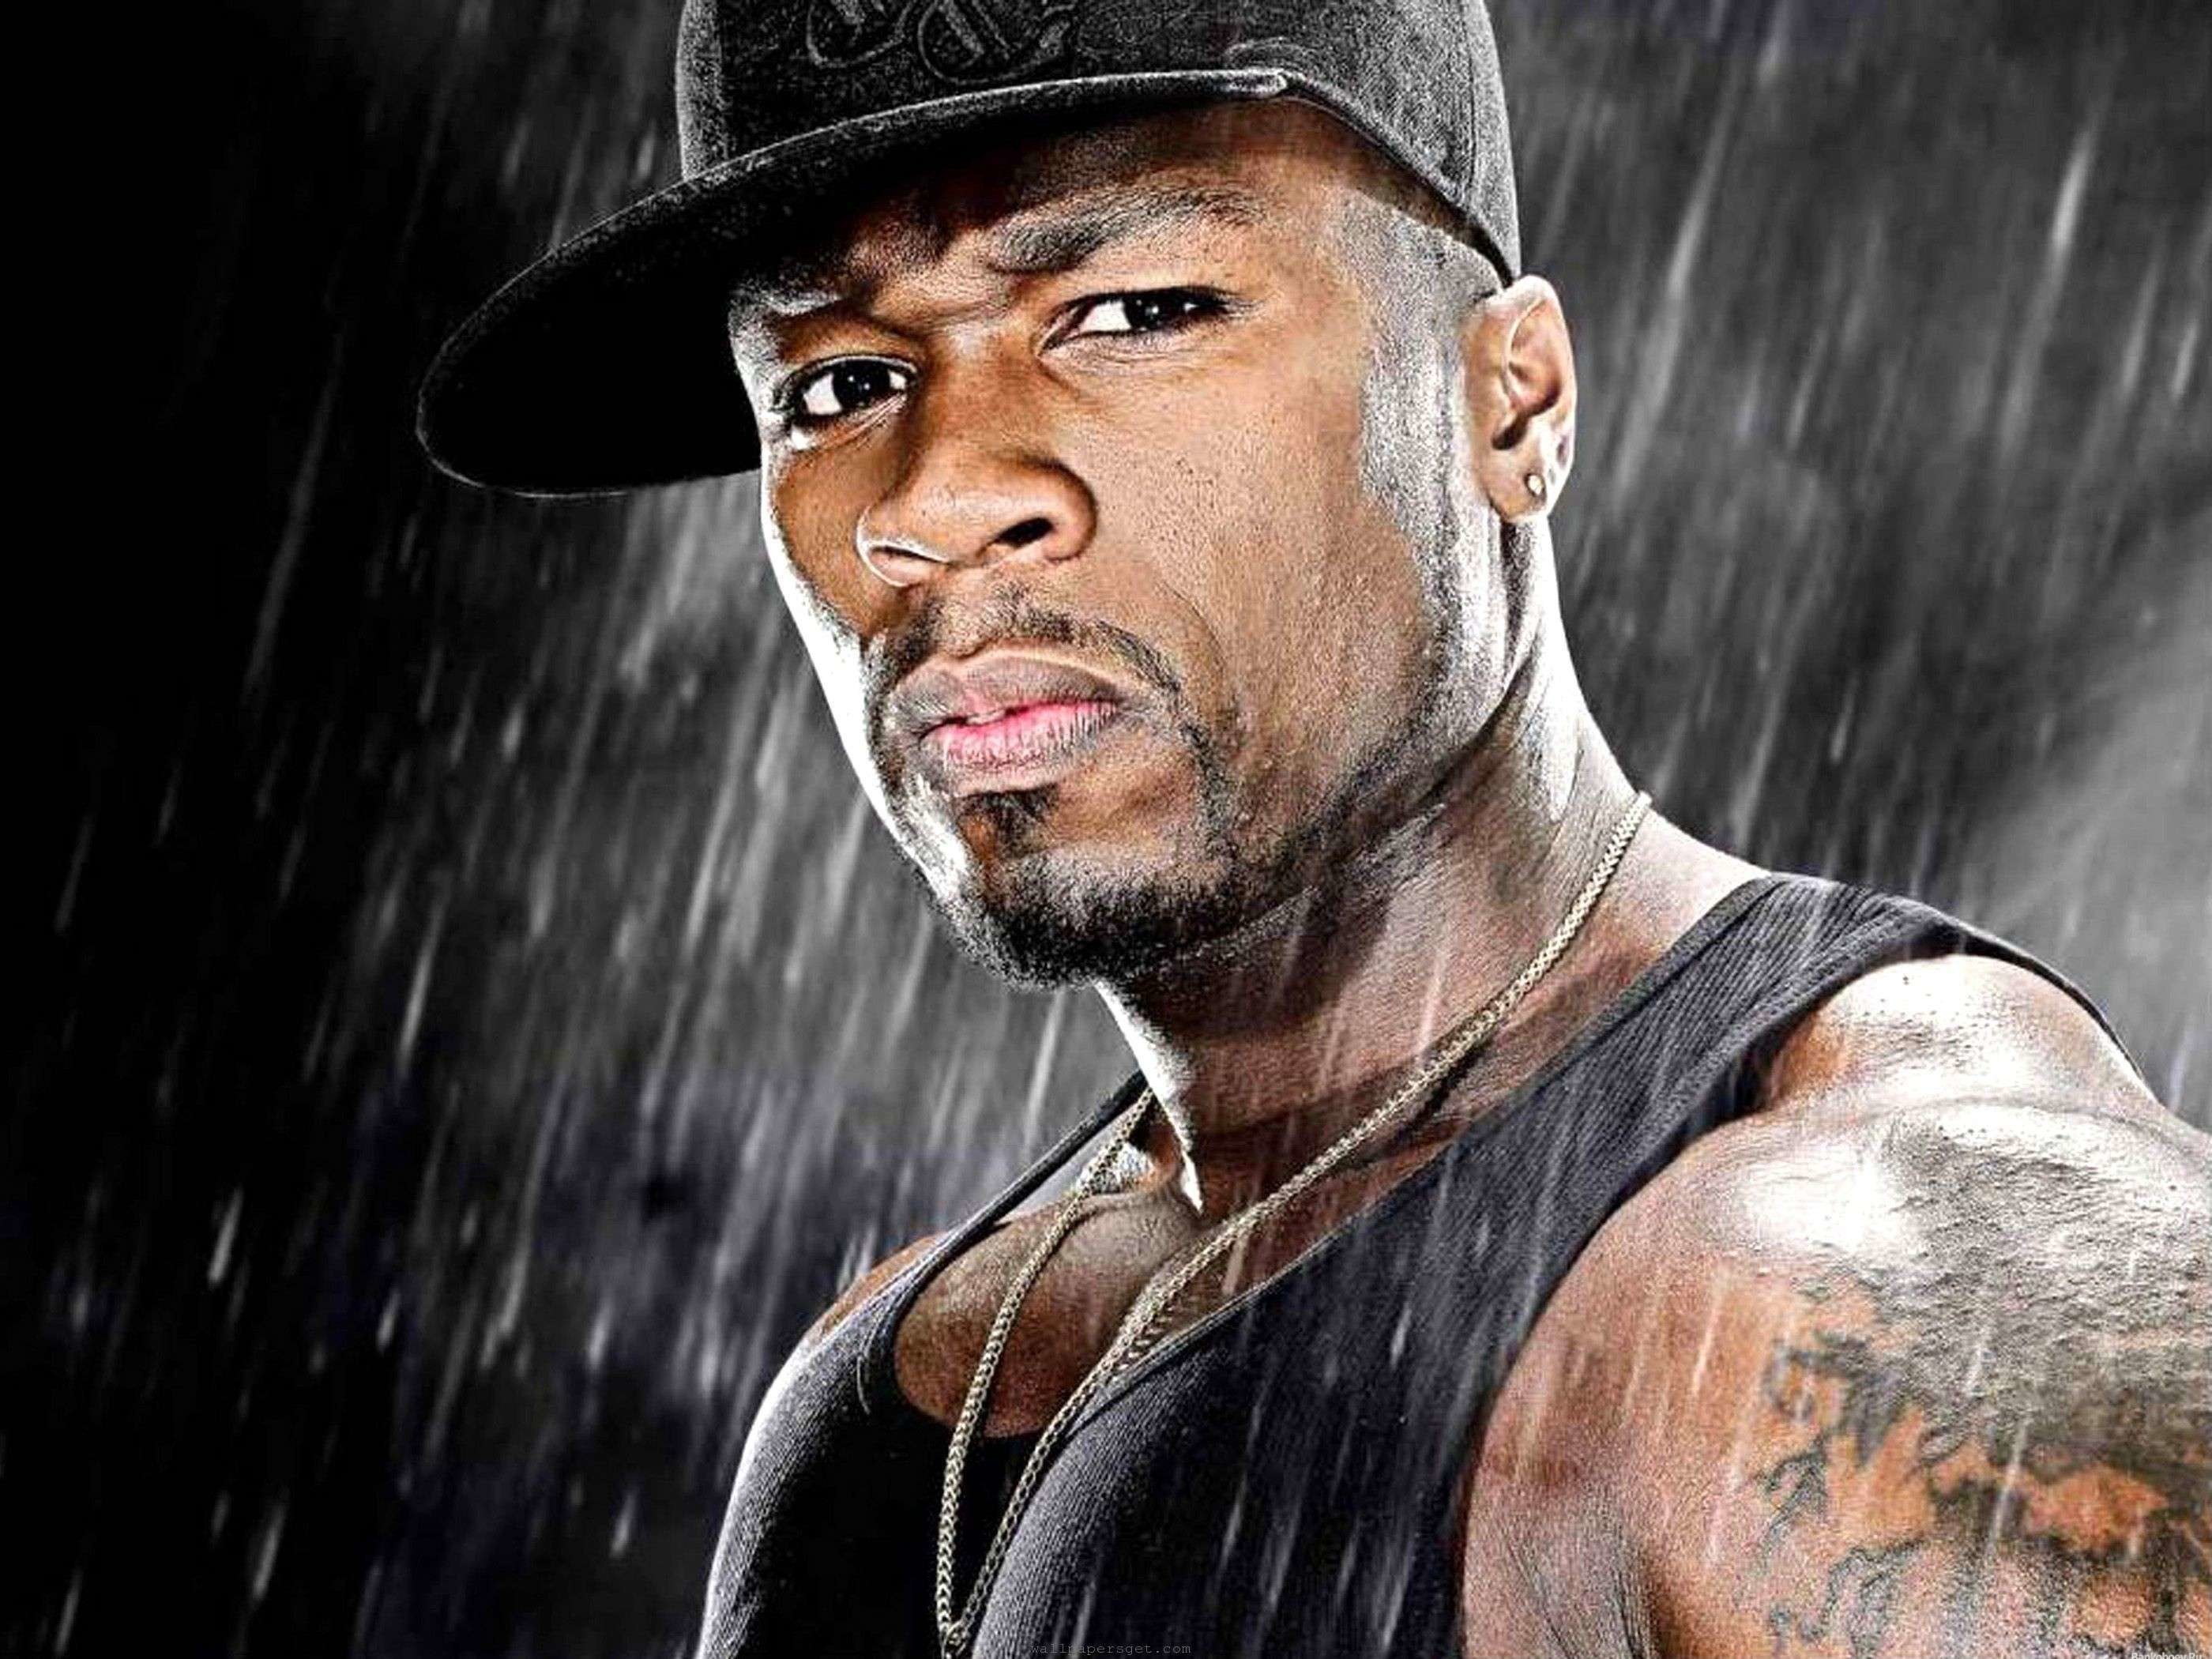 50 Cent Wallpaper 2018 (53+ pictures)